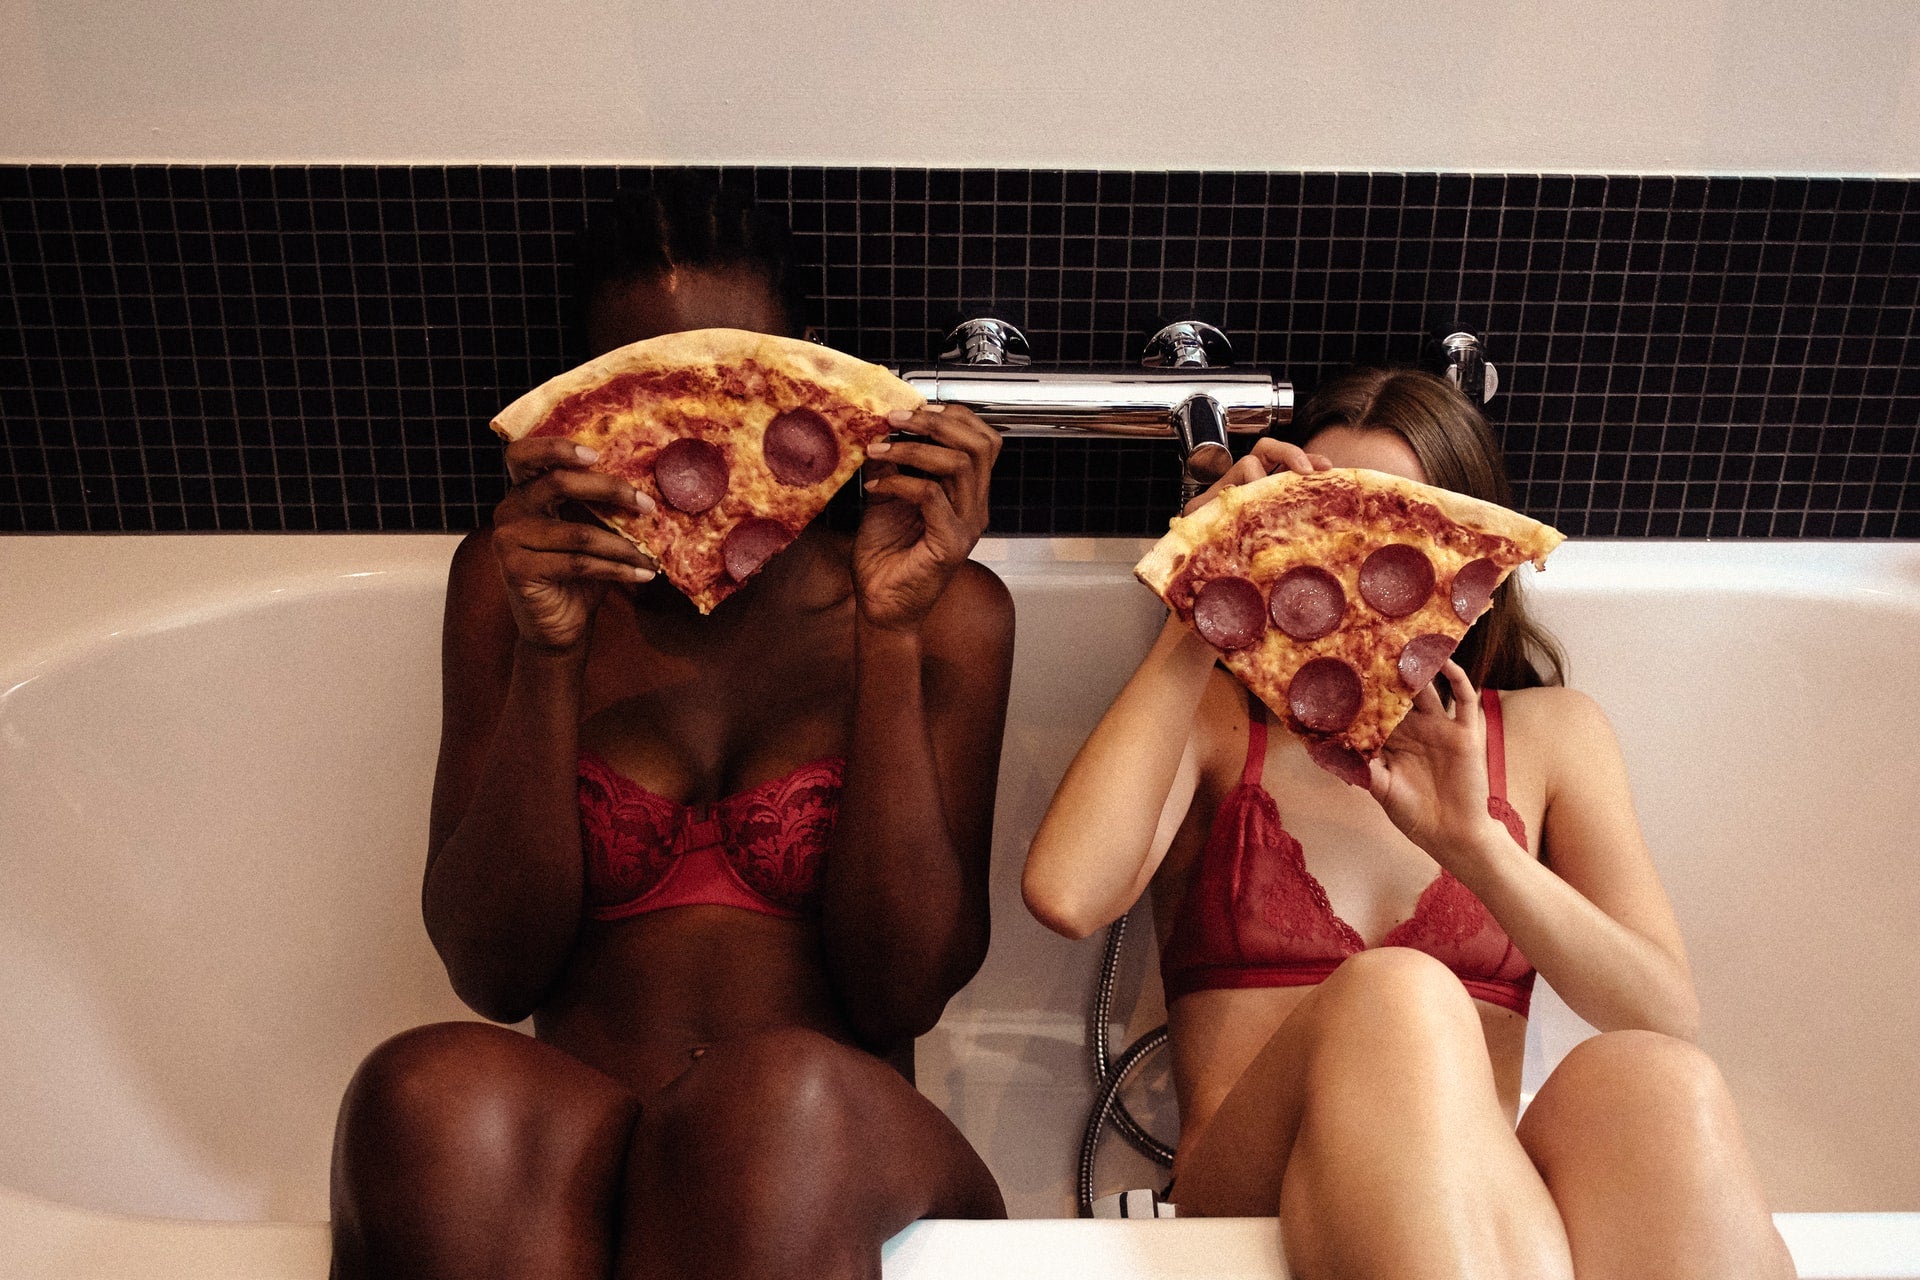 two girls eating pizza